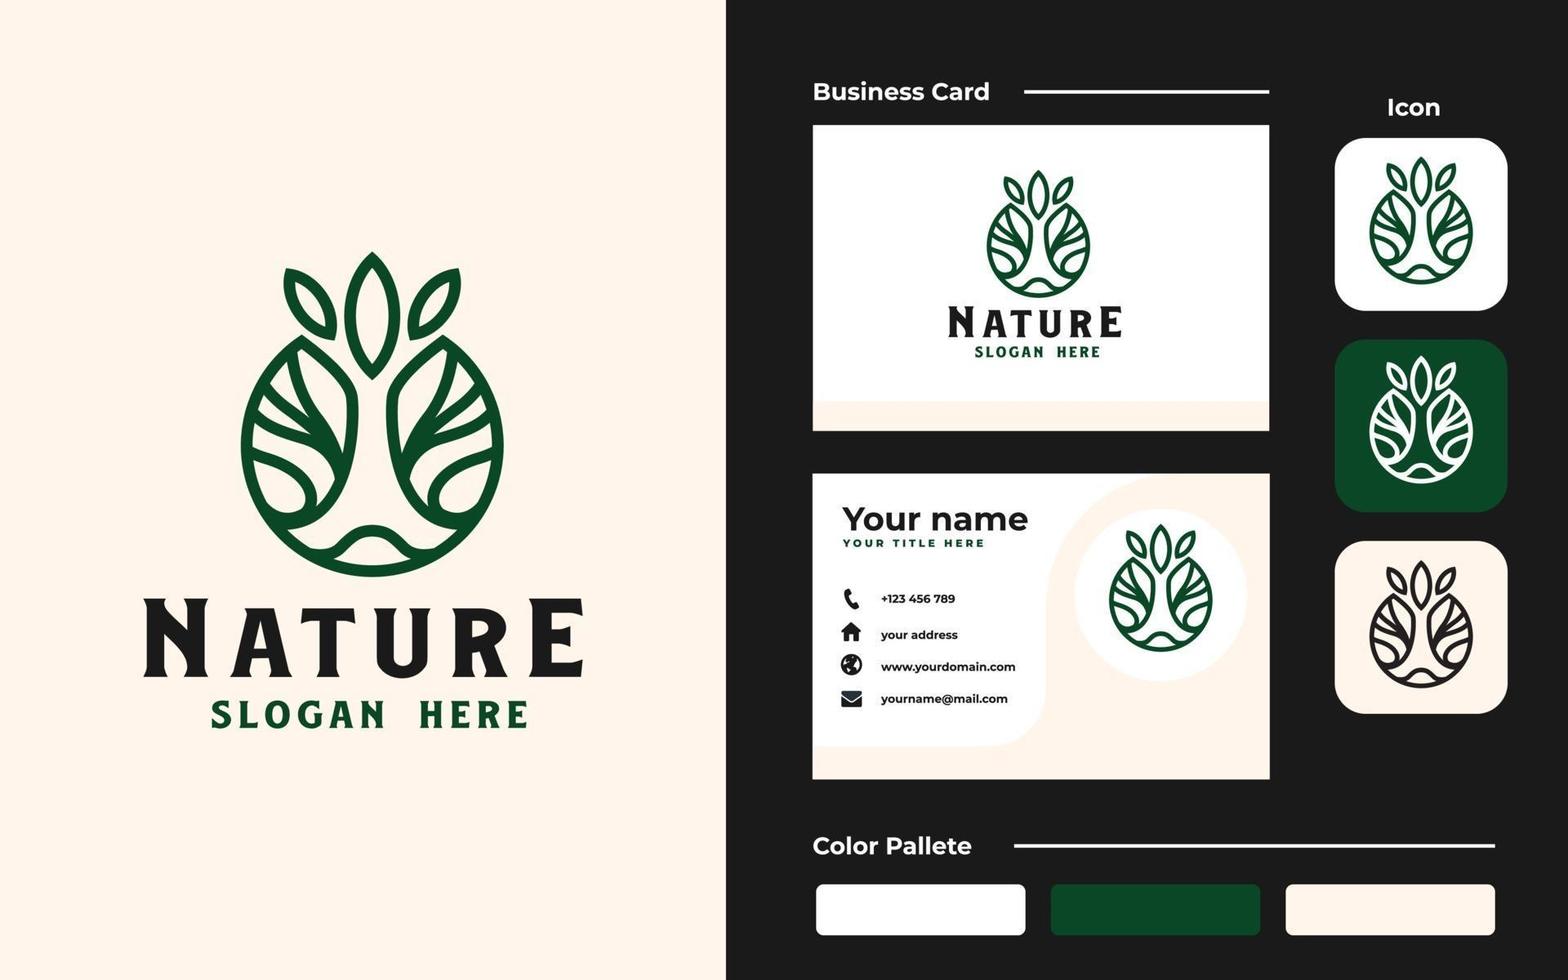 Circle root of the tree logo and business card template. Vector illustration